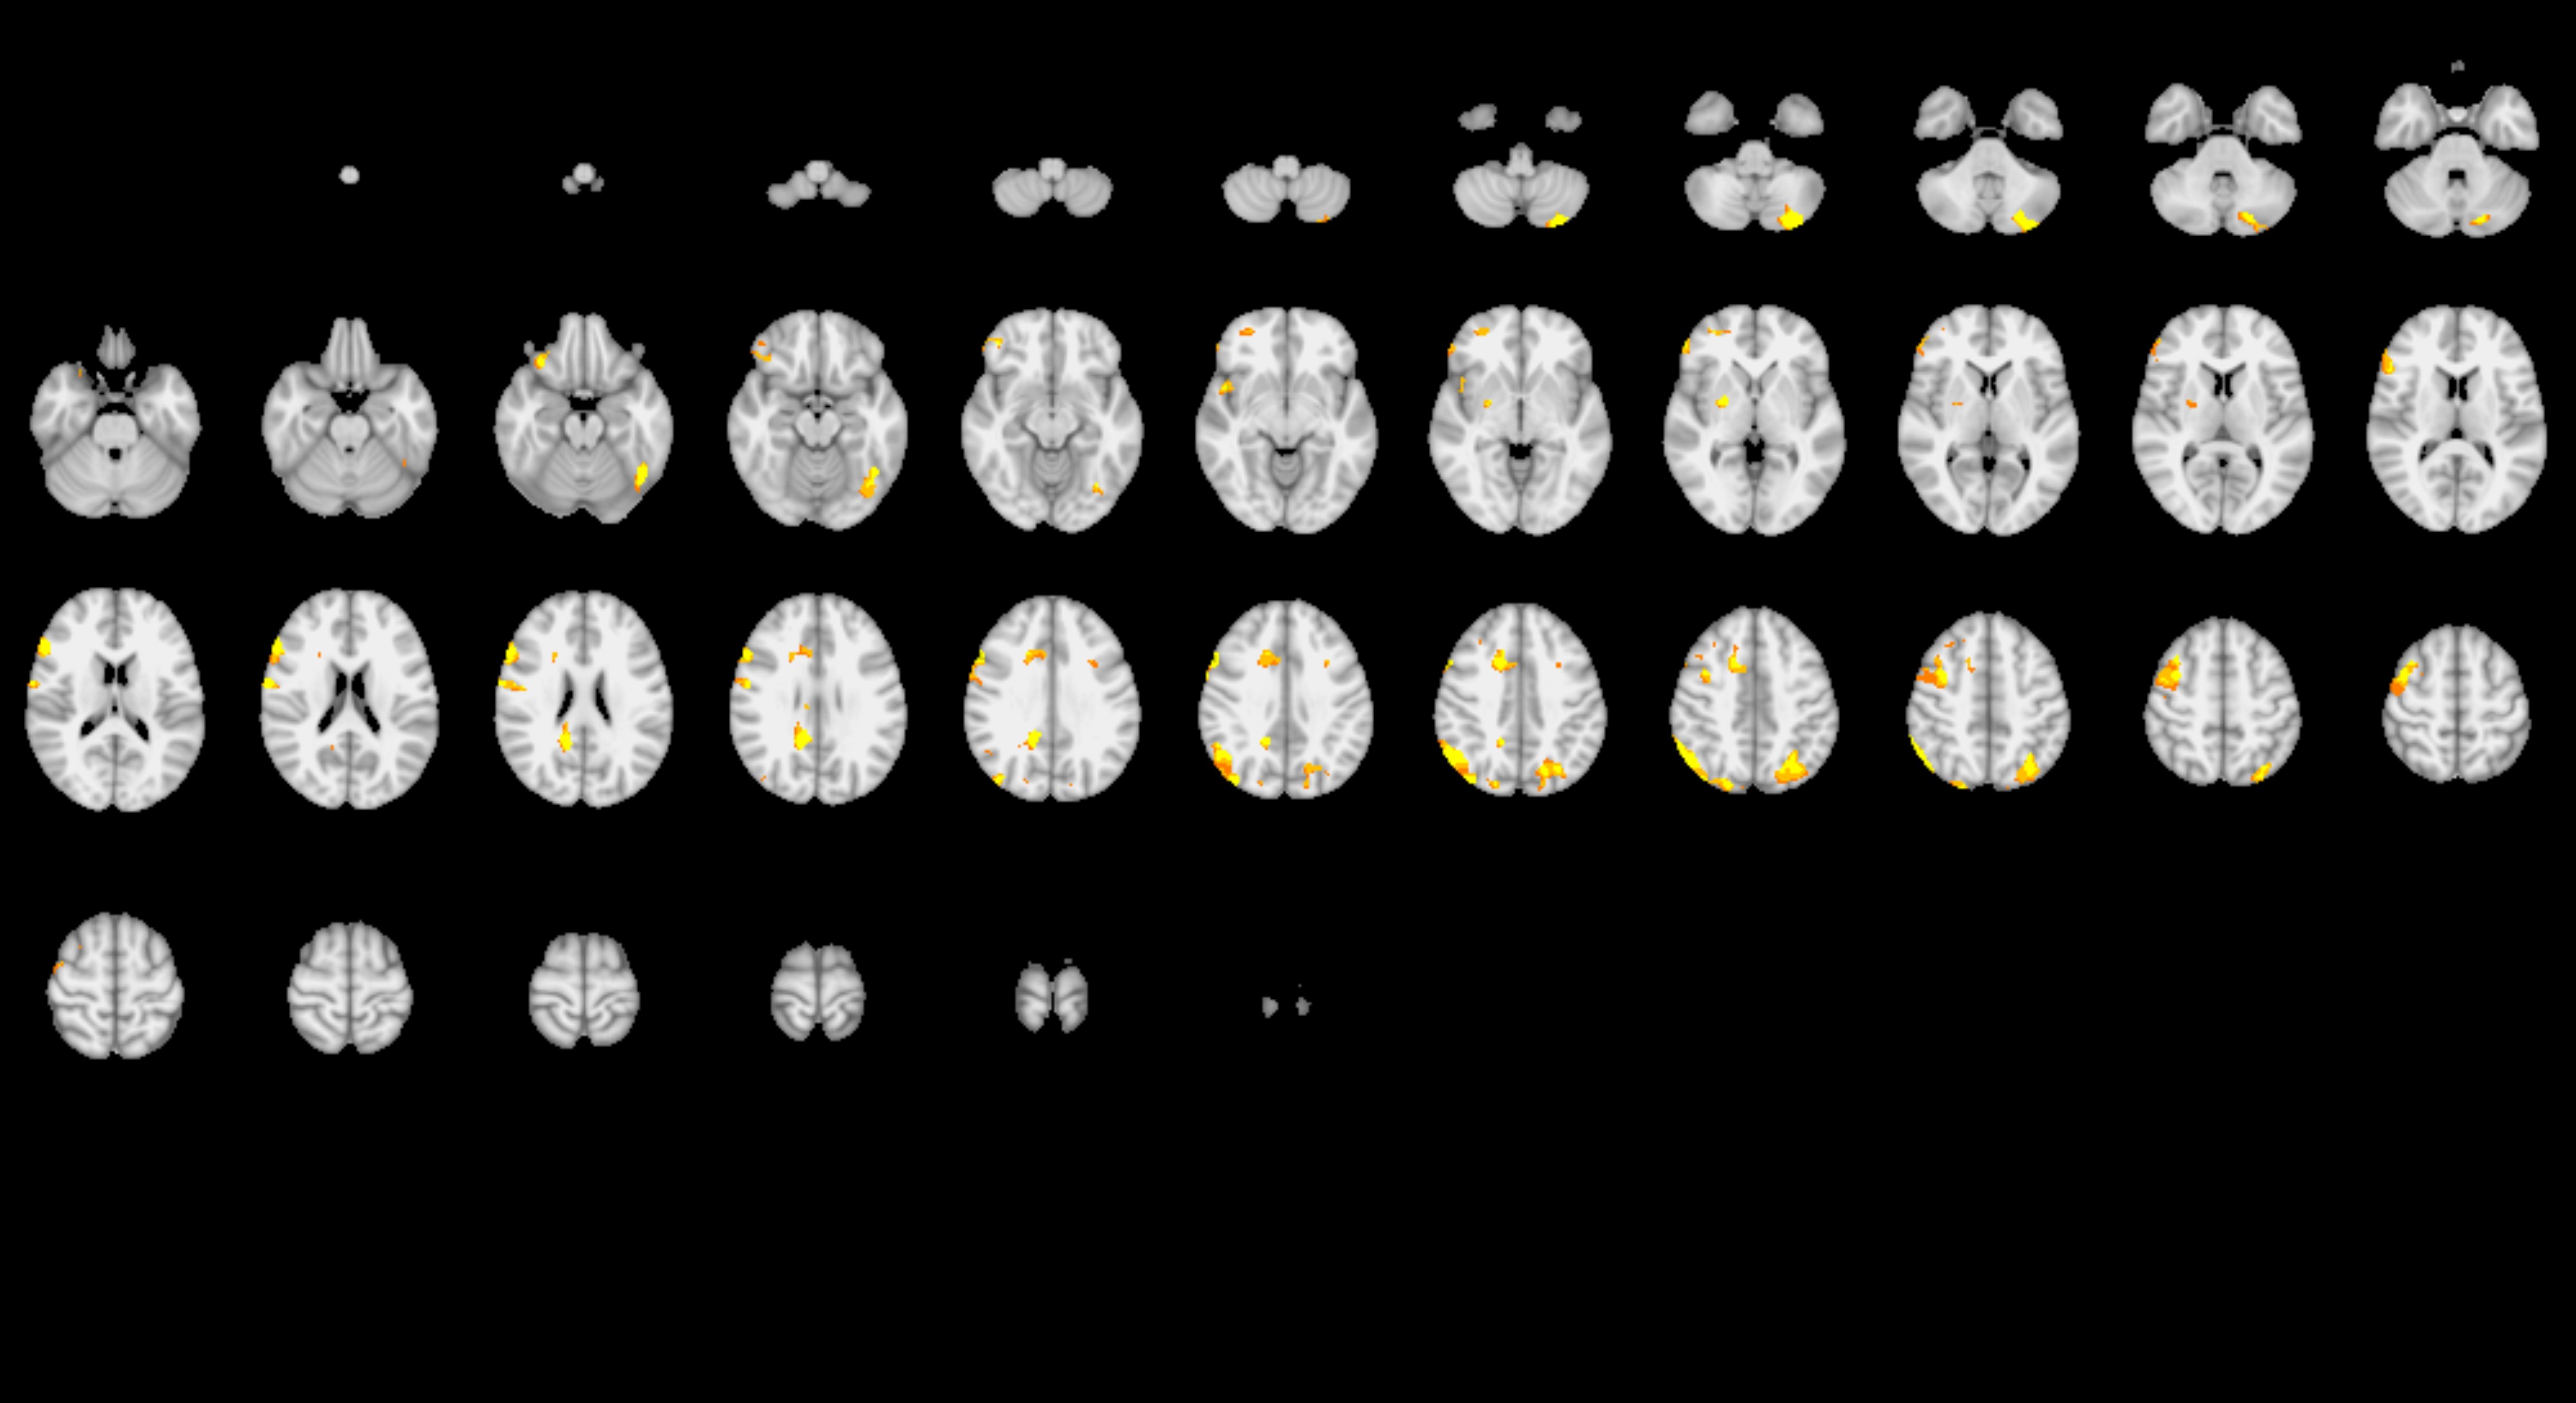 Two sets of imagery from brain analyses